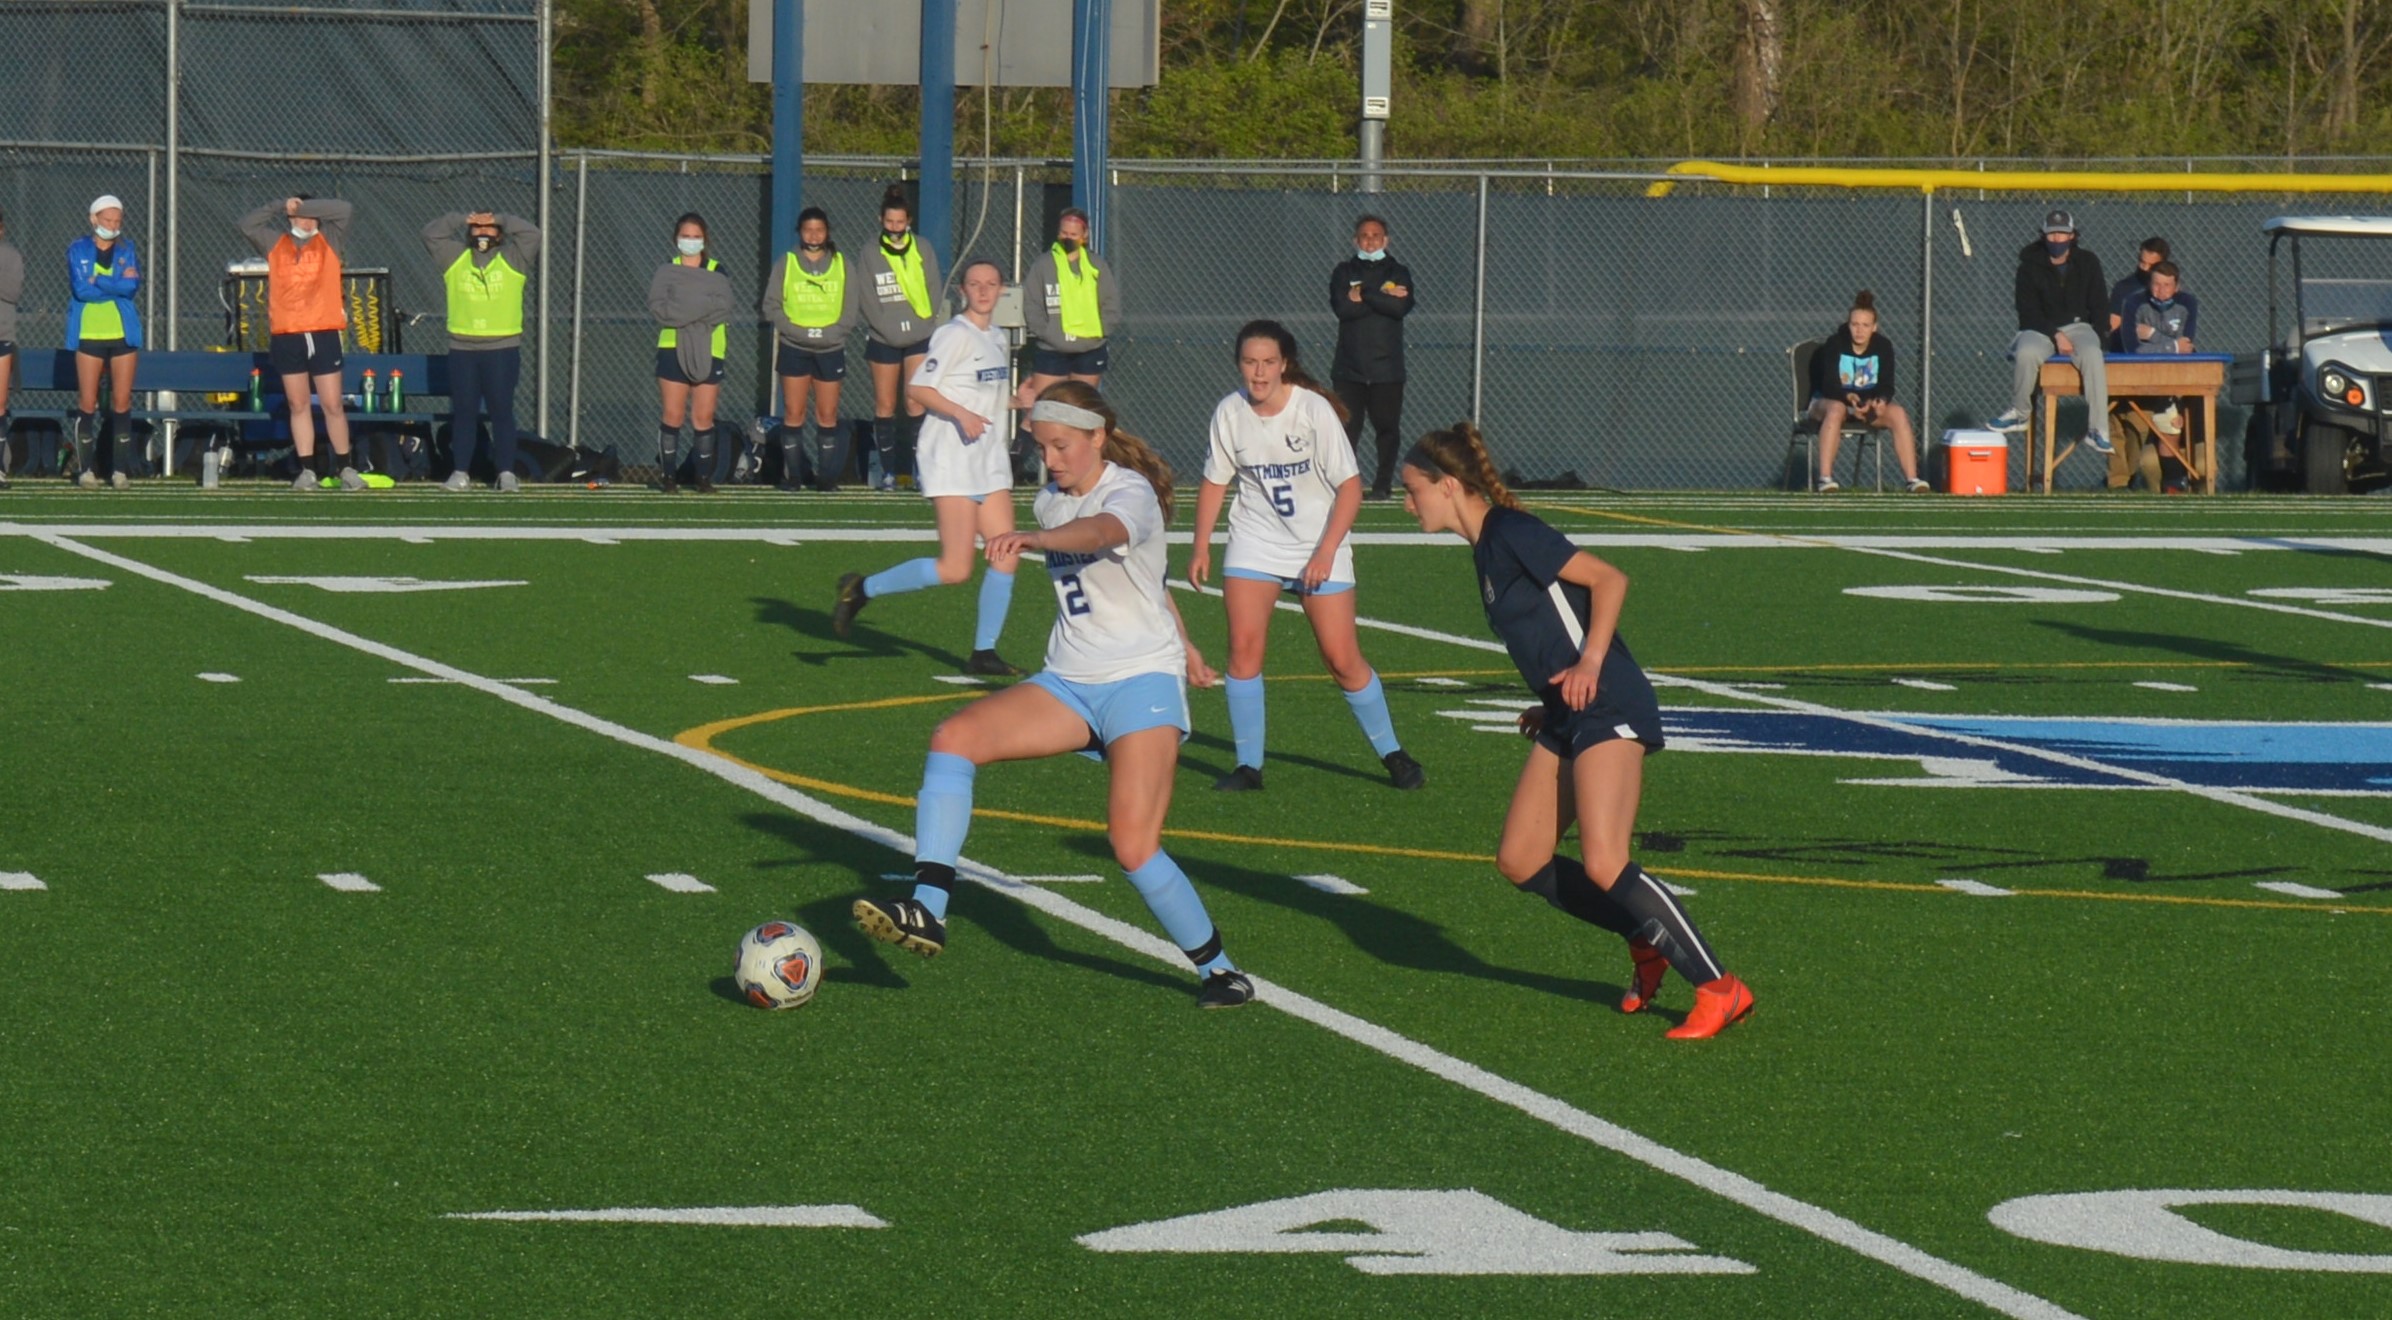 Defense and Schulte's Two Goals Propel Blue Jays to 2-0 Victory